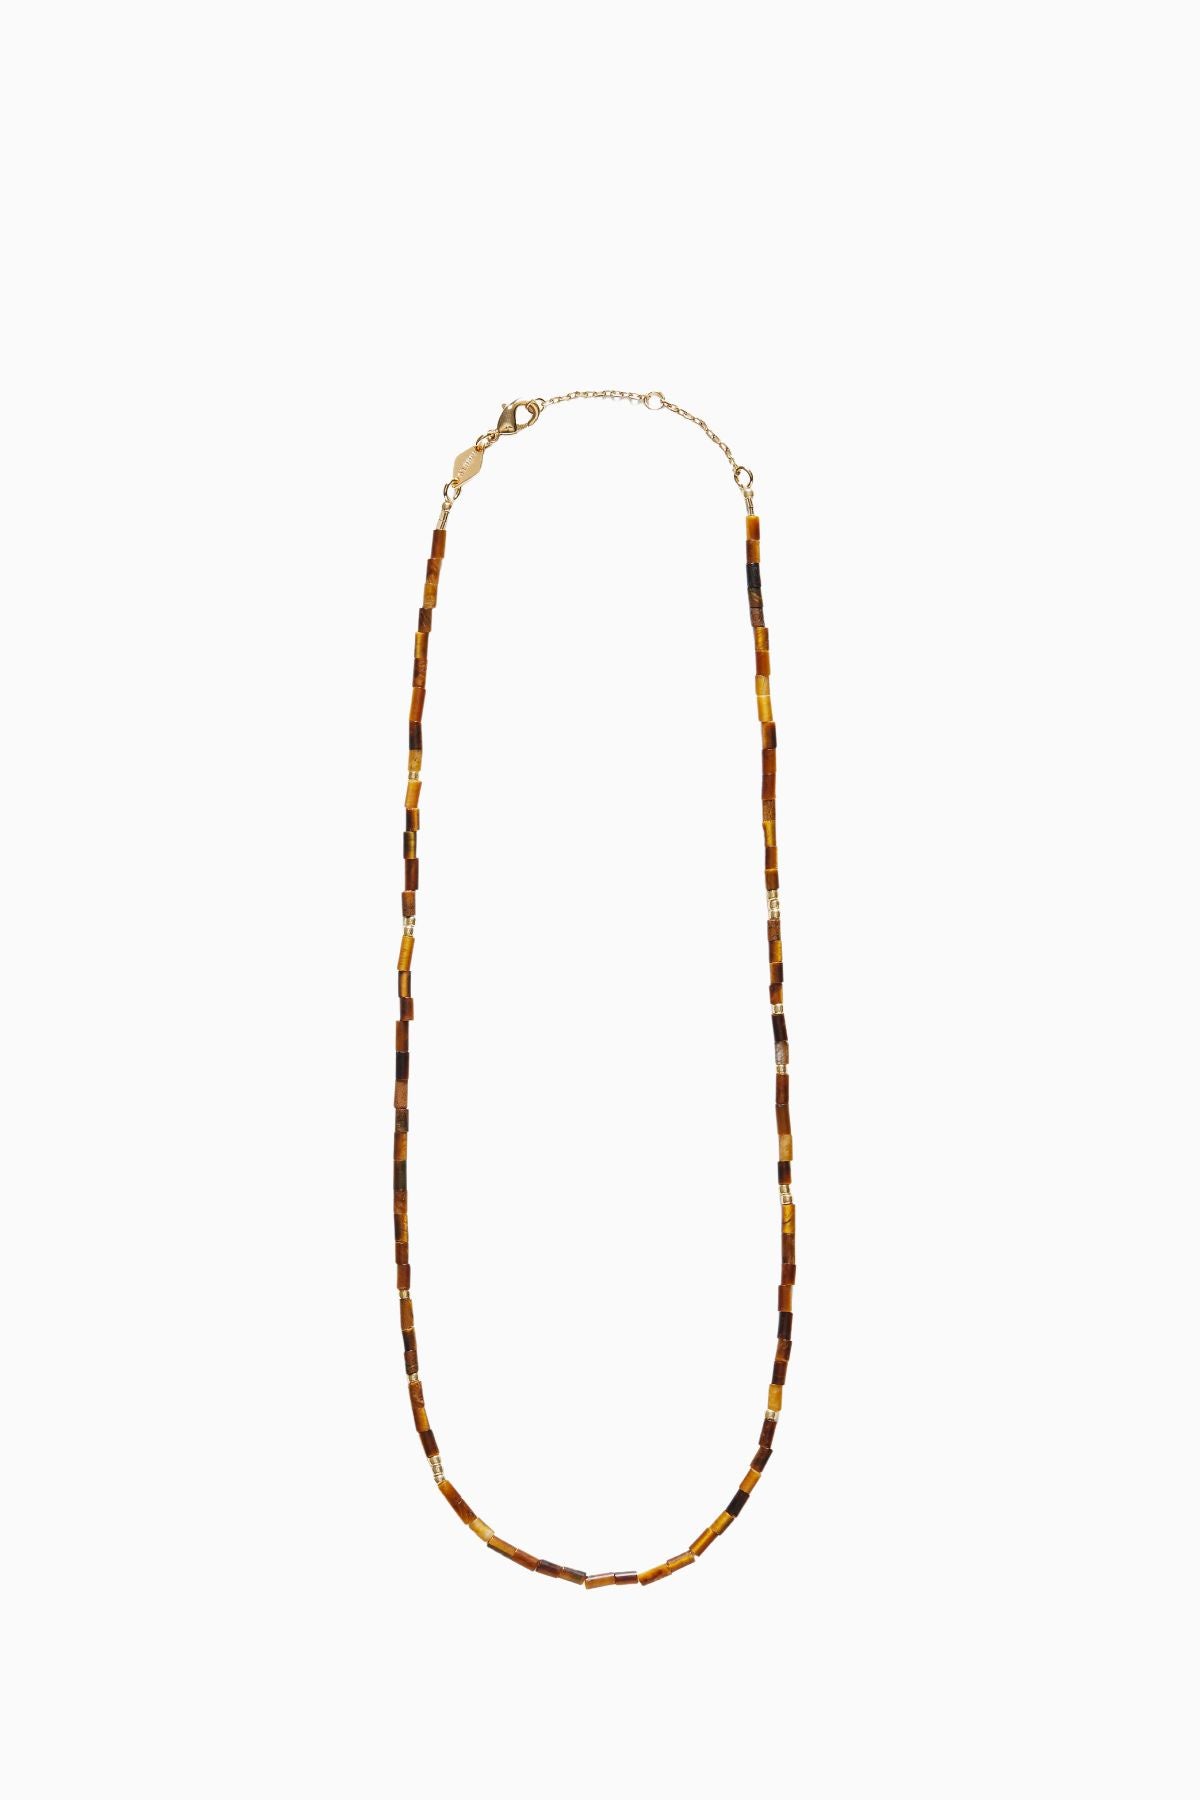 Anni Lu Sun Stalker Necklace - Eye of the Tiger